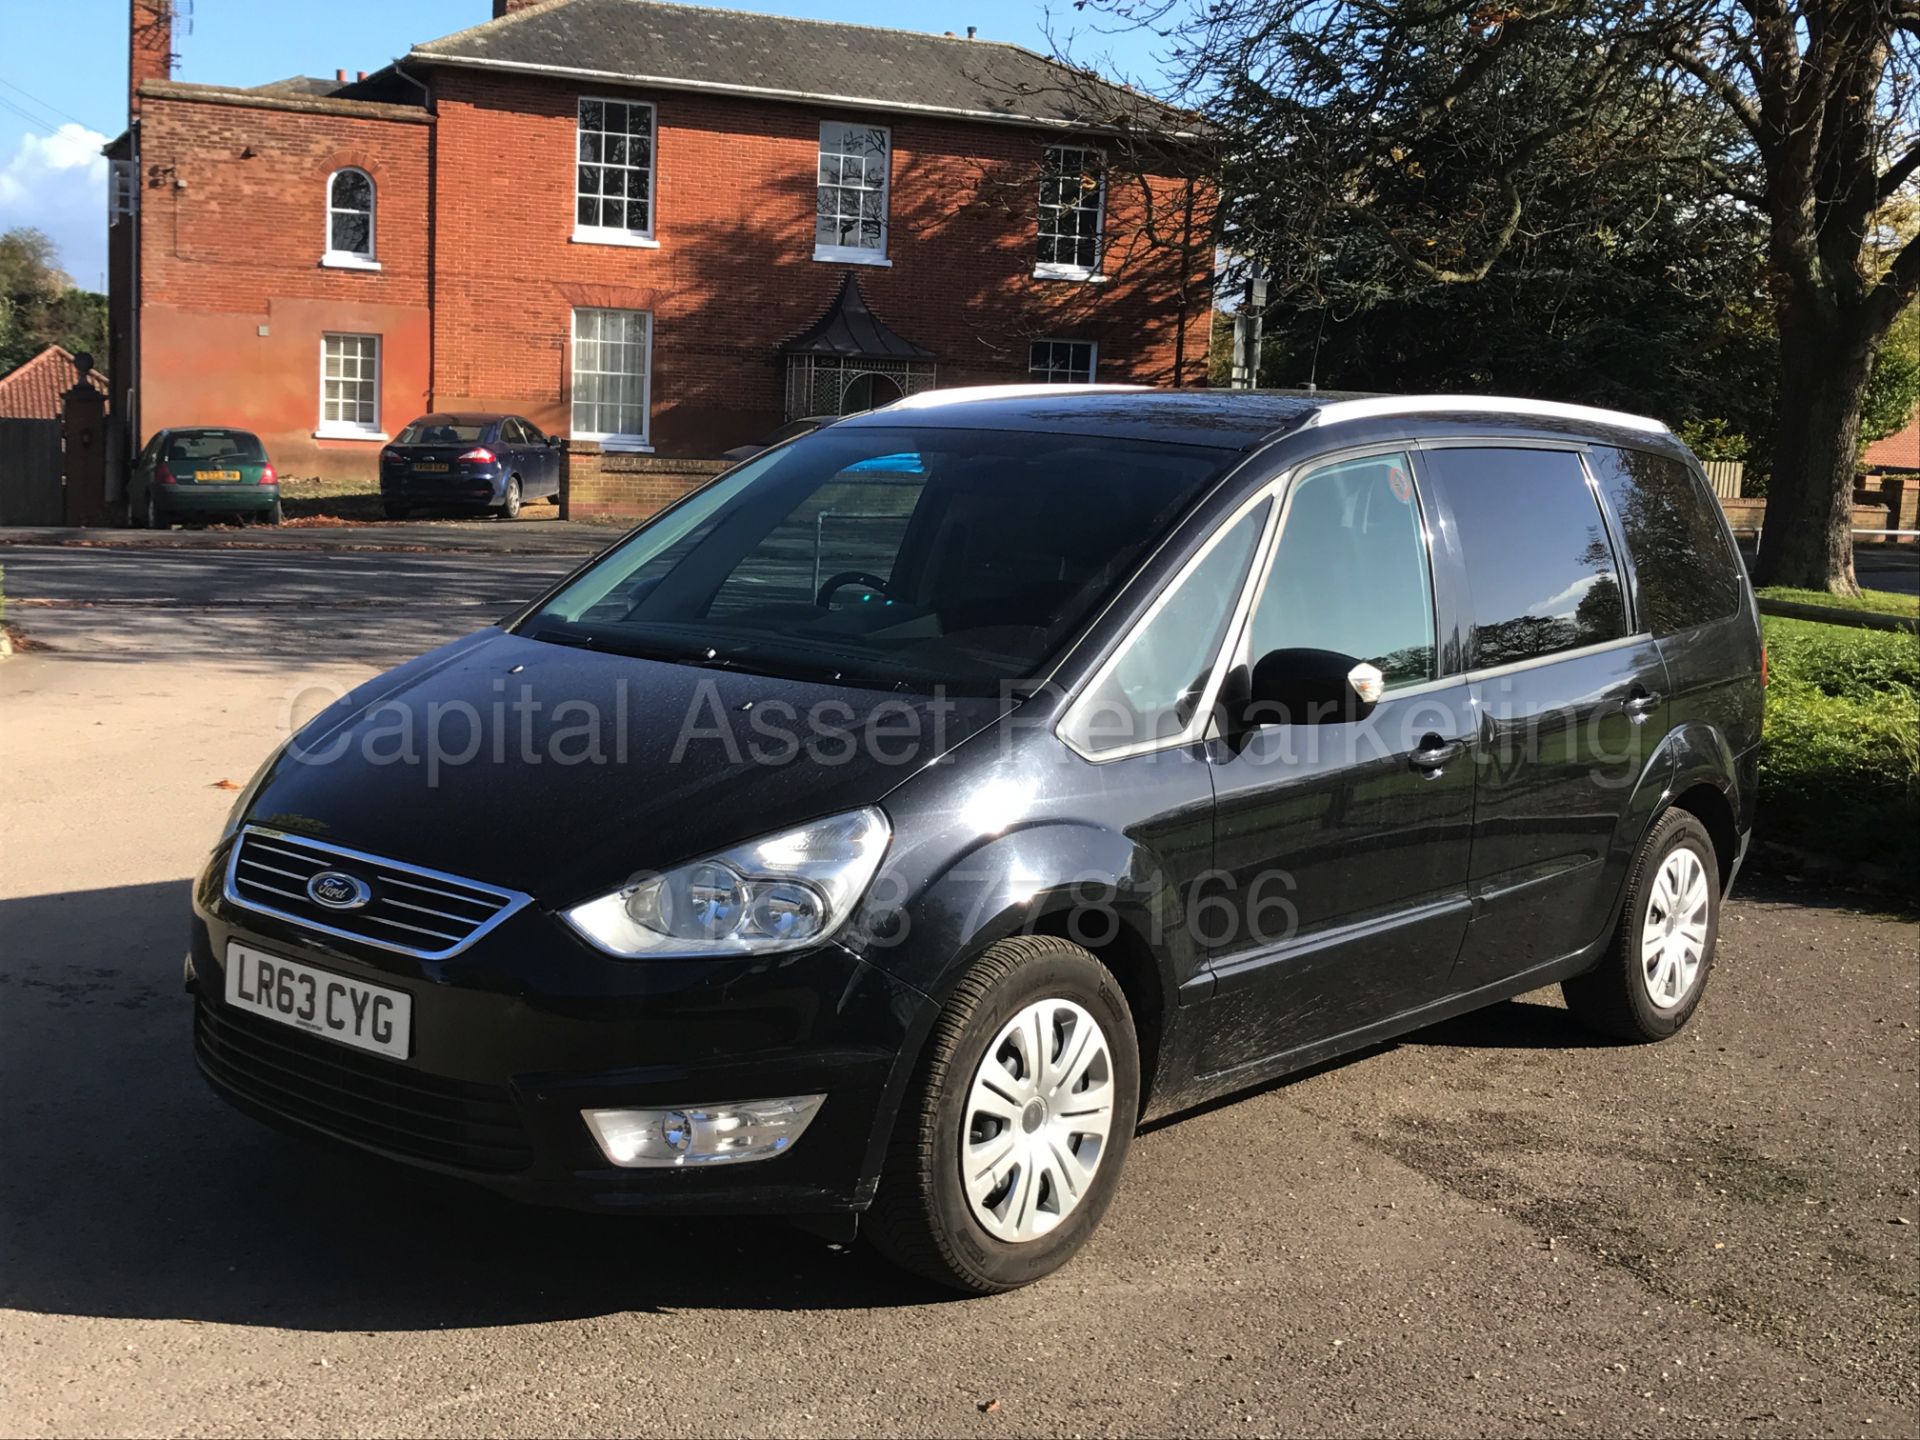 (ON SALE) FORD GALAXY 'ZETEC' 7 SEATER MPV (2014 MODEL) '2.0 TDCI -140 BHP' (1 OWNER) *FULL HISTORY*